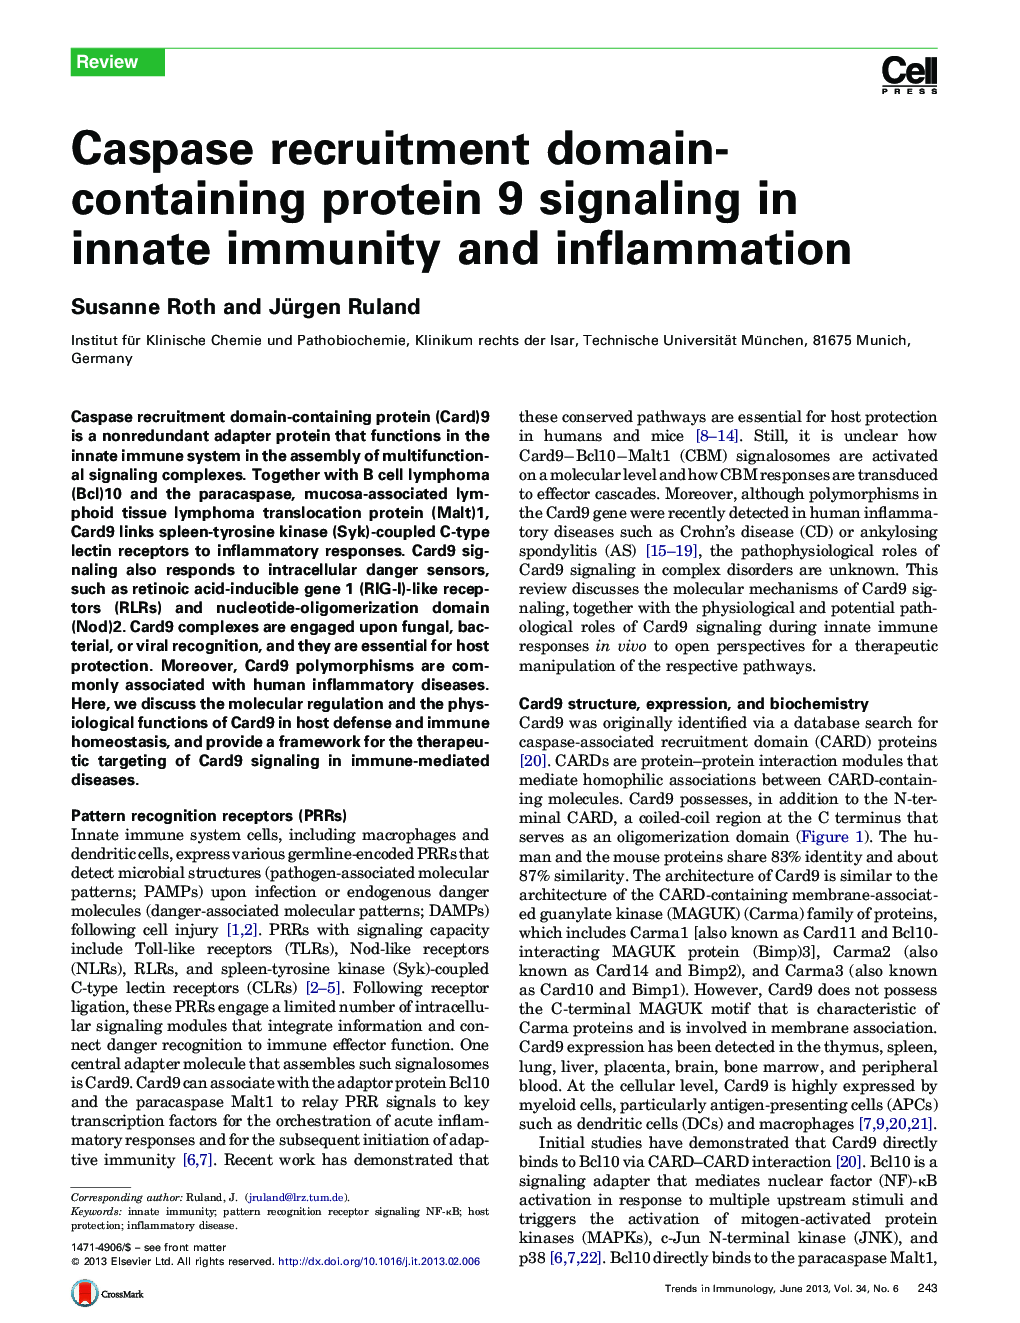 Caspase recruitment domain-containing protein 9 signaling in innate immunity and inflammation